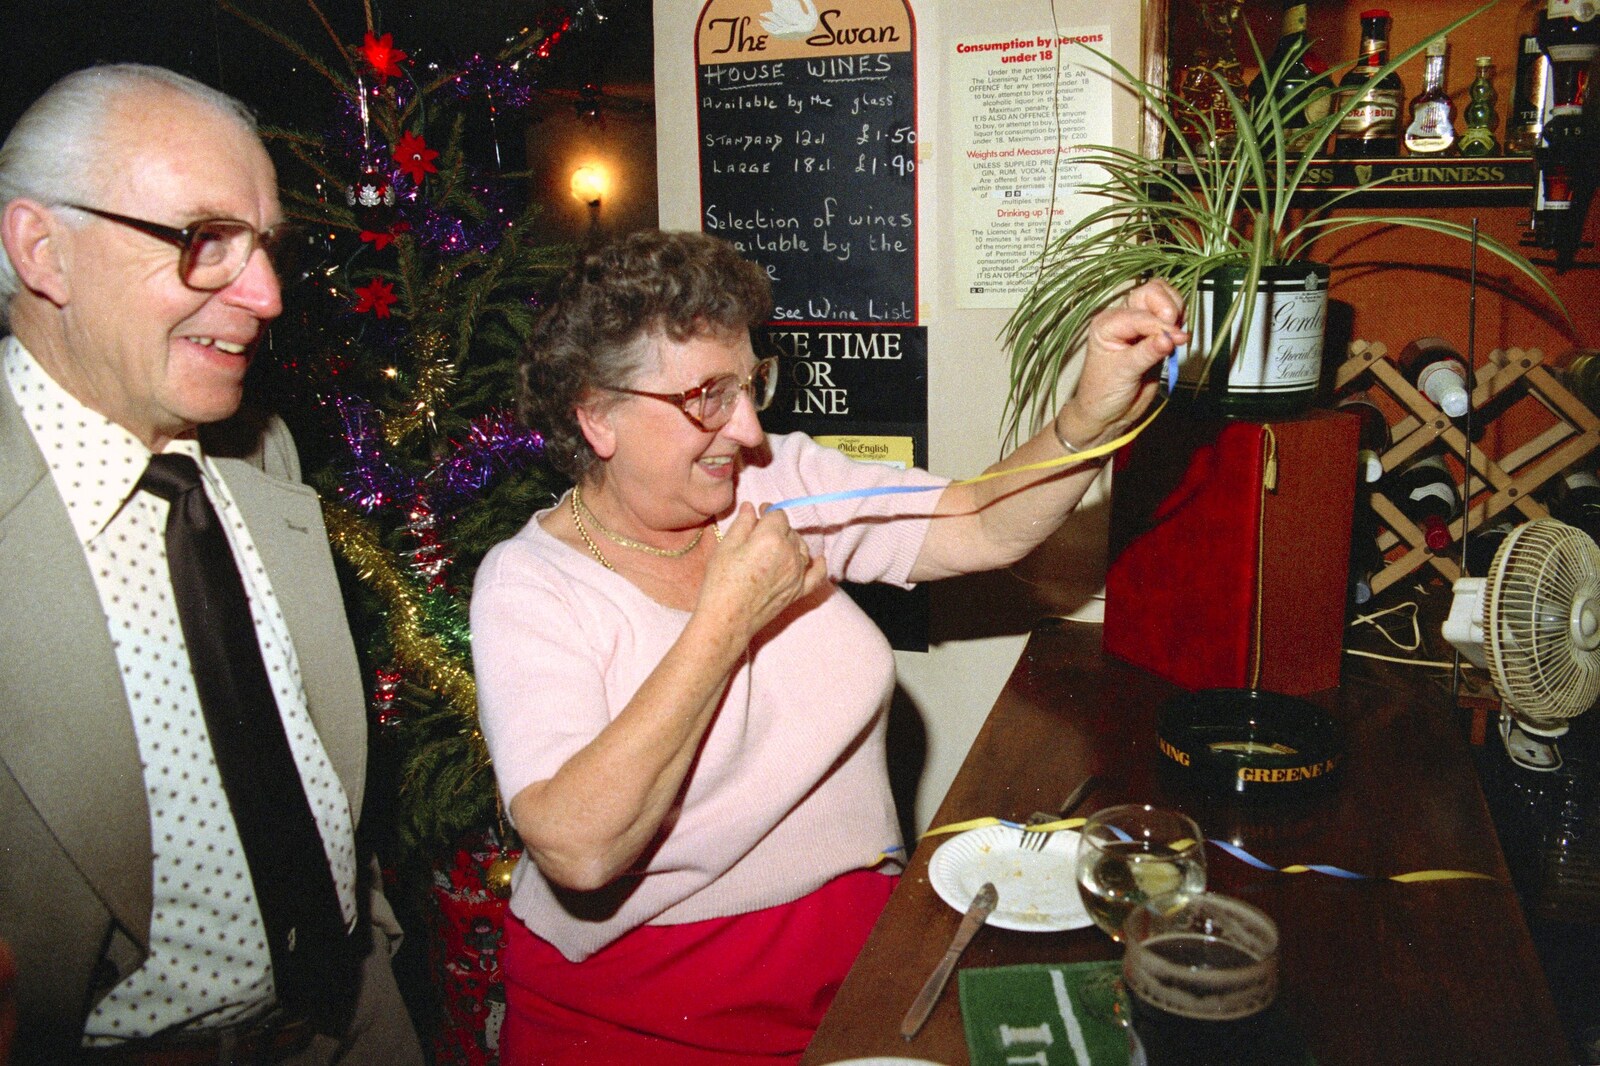 Arline flings some paper tape around from New Year's Eve at the Swan Inn, Brome, Suffolk - 31st December 1994